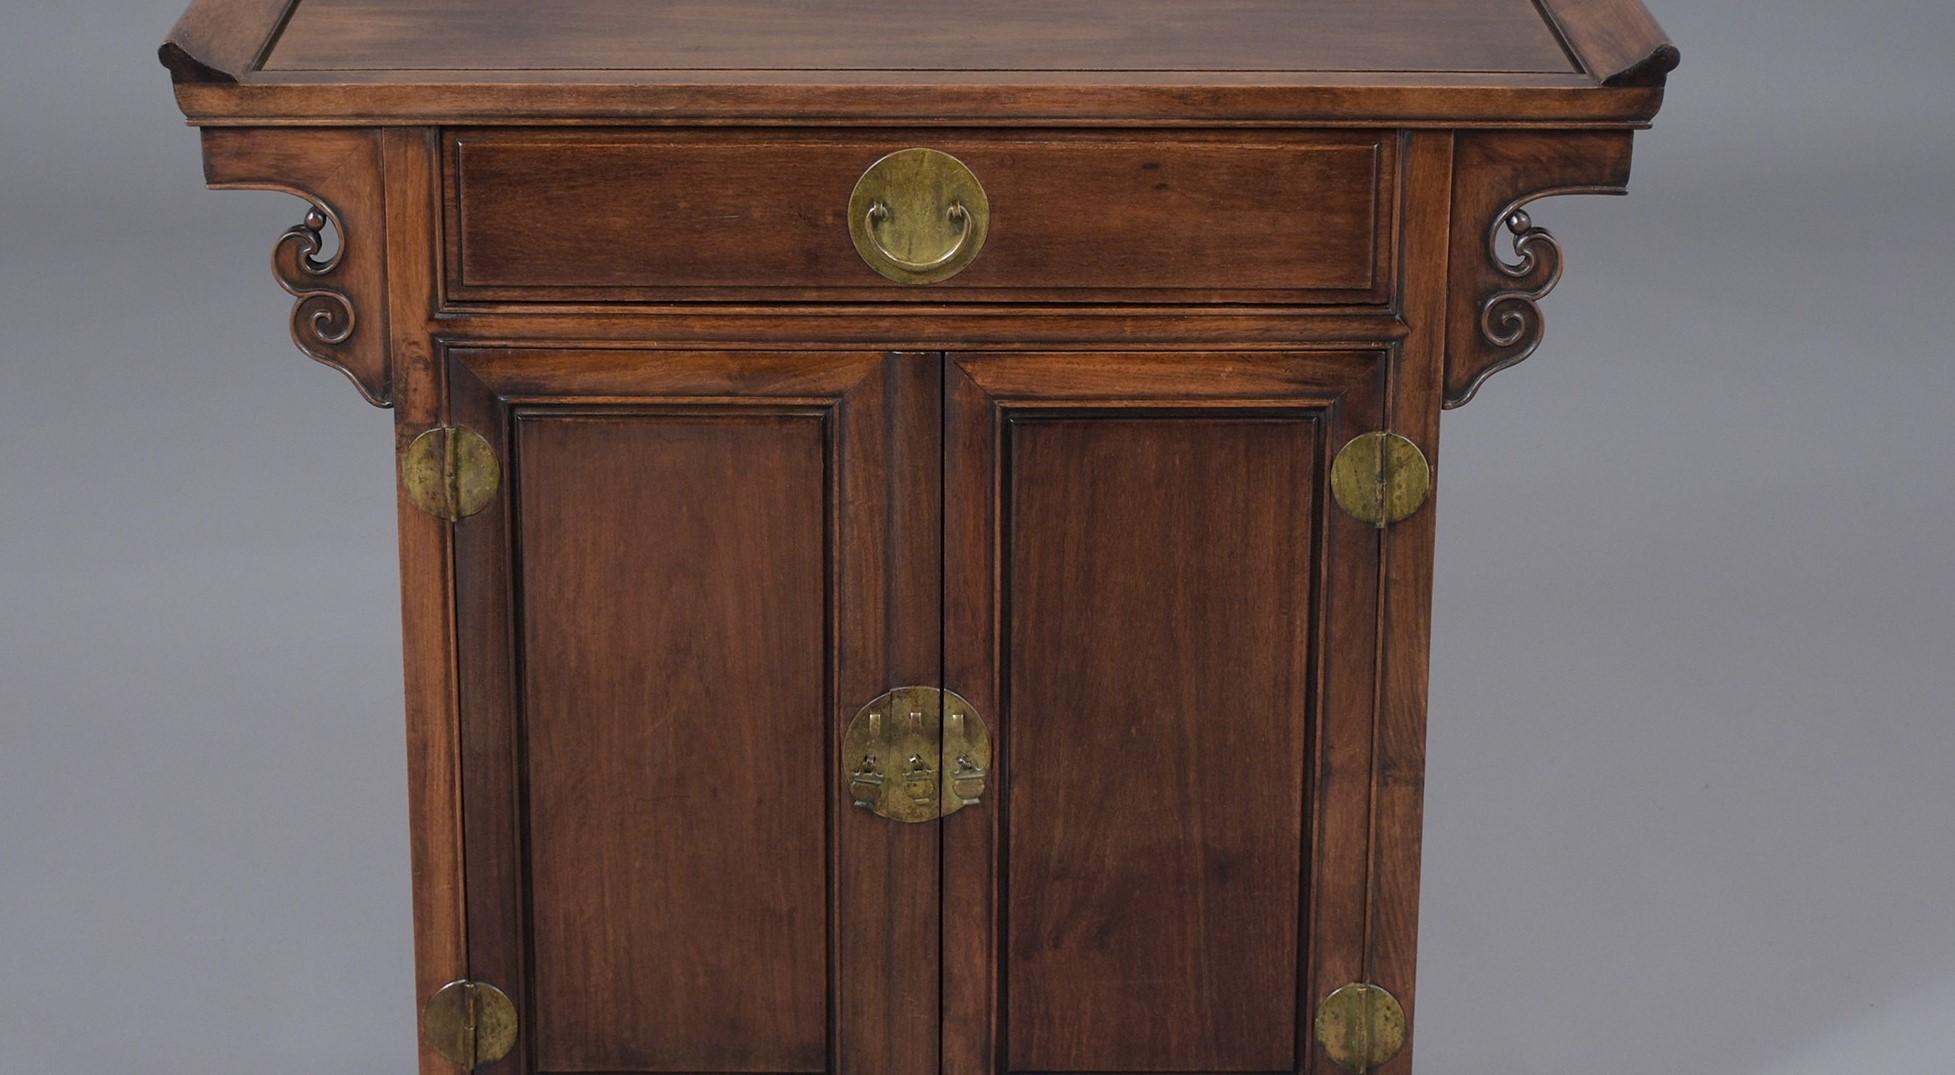 A vintage Chinese console made out of mahogany wood features a dark mahogany color and carved arched motifs. This fabulous piece comes with a single drawer, double doors with brass handles and the interior has a single shelf. This 1950's carved